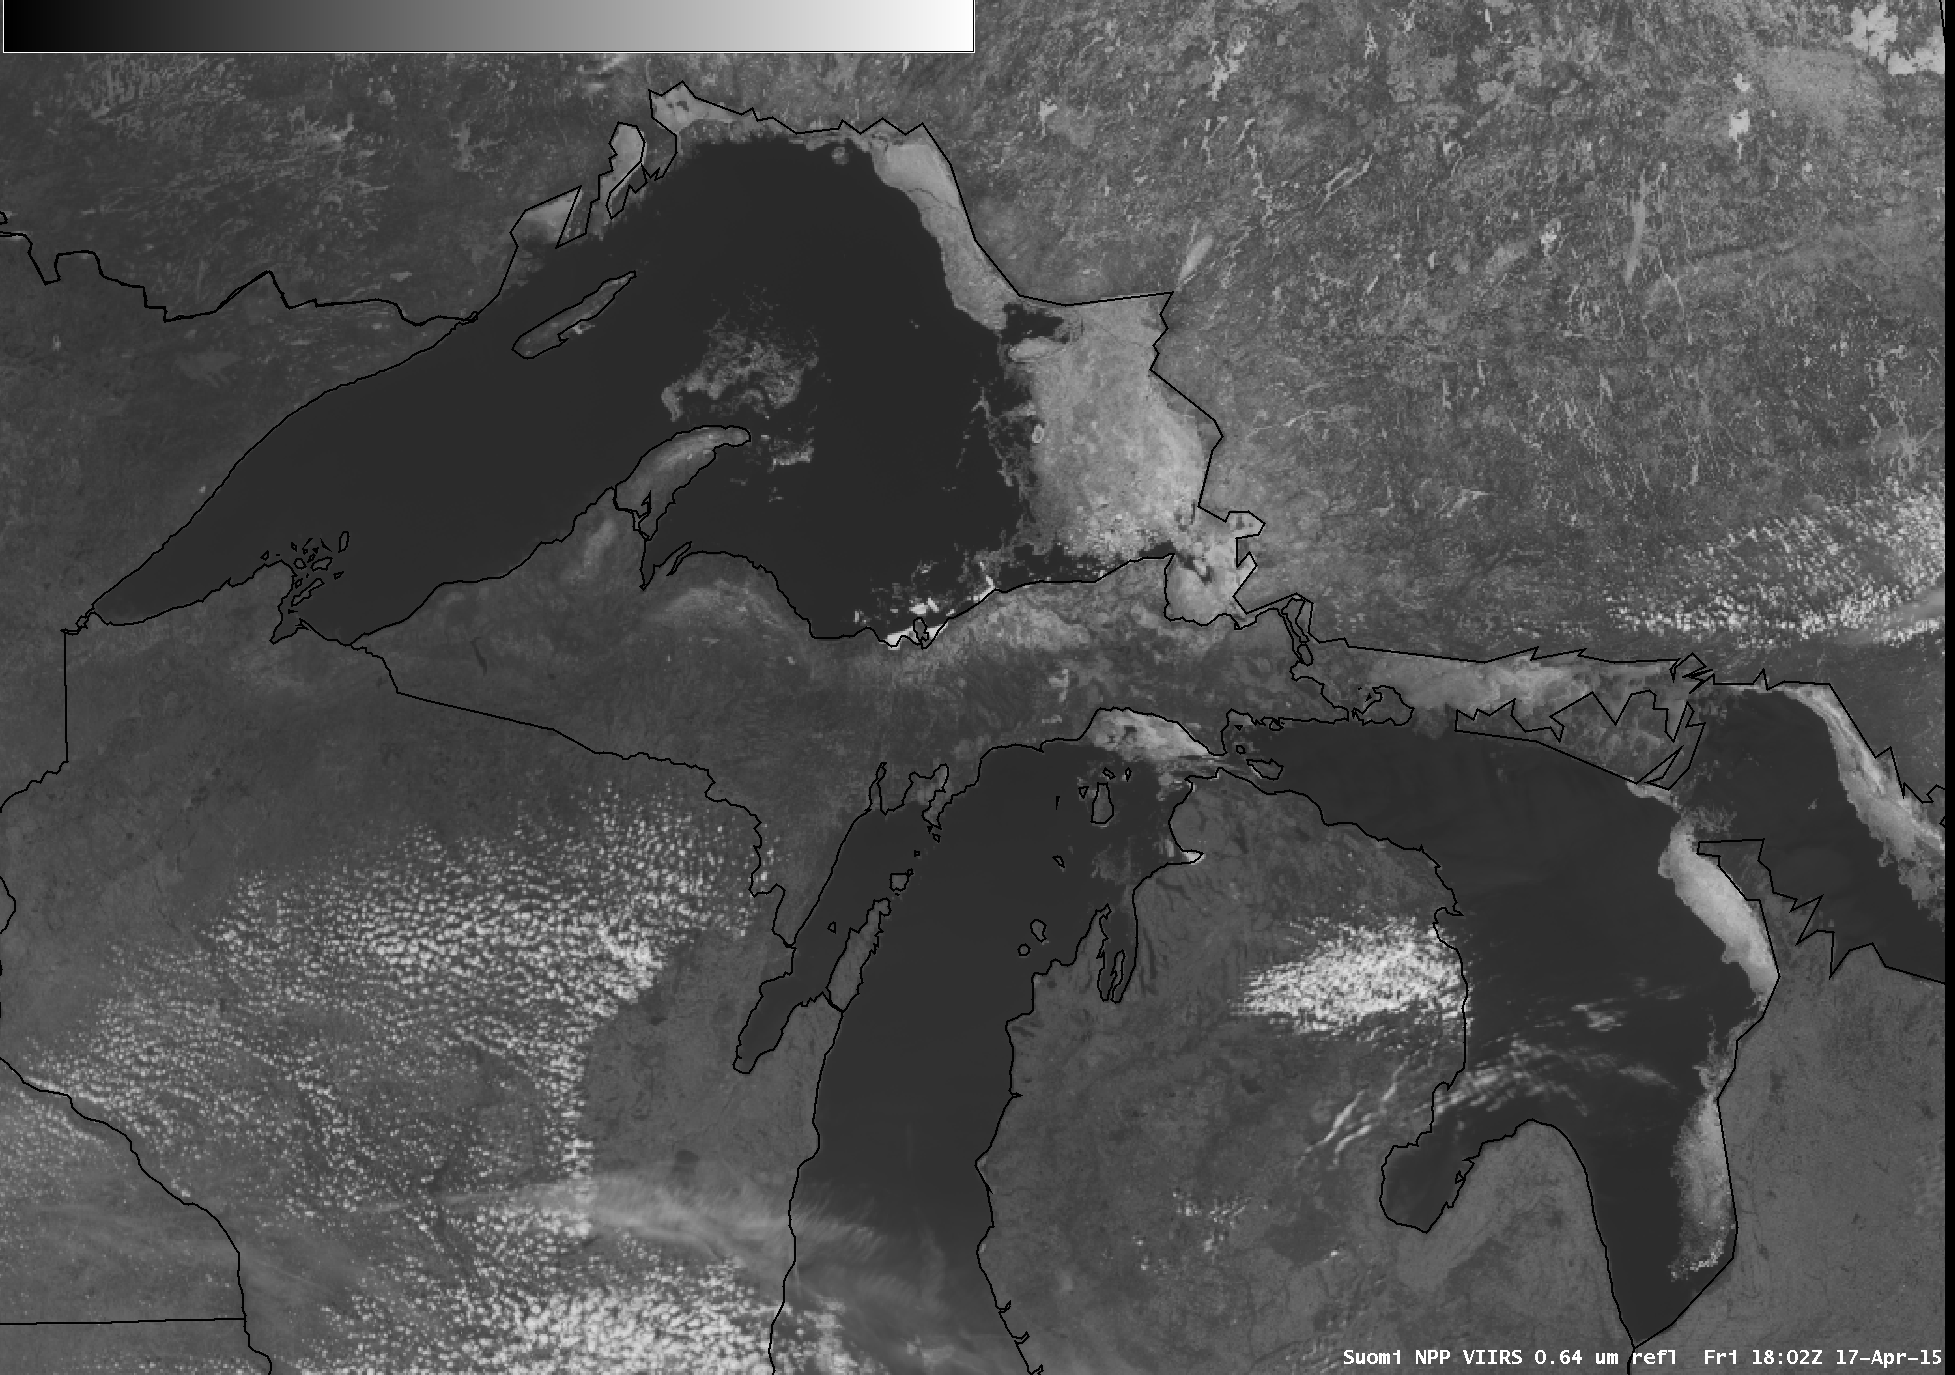 Suomi NPP VIIRS 0.64 µm visible and false-color RGB images (click to enlarge)